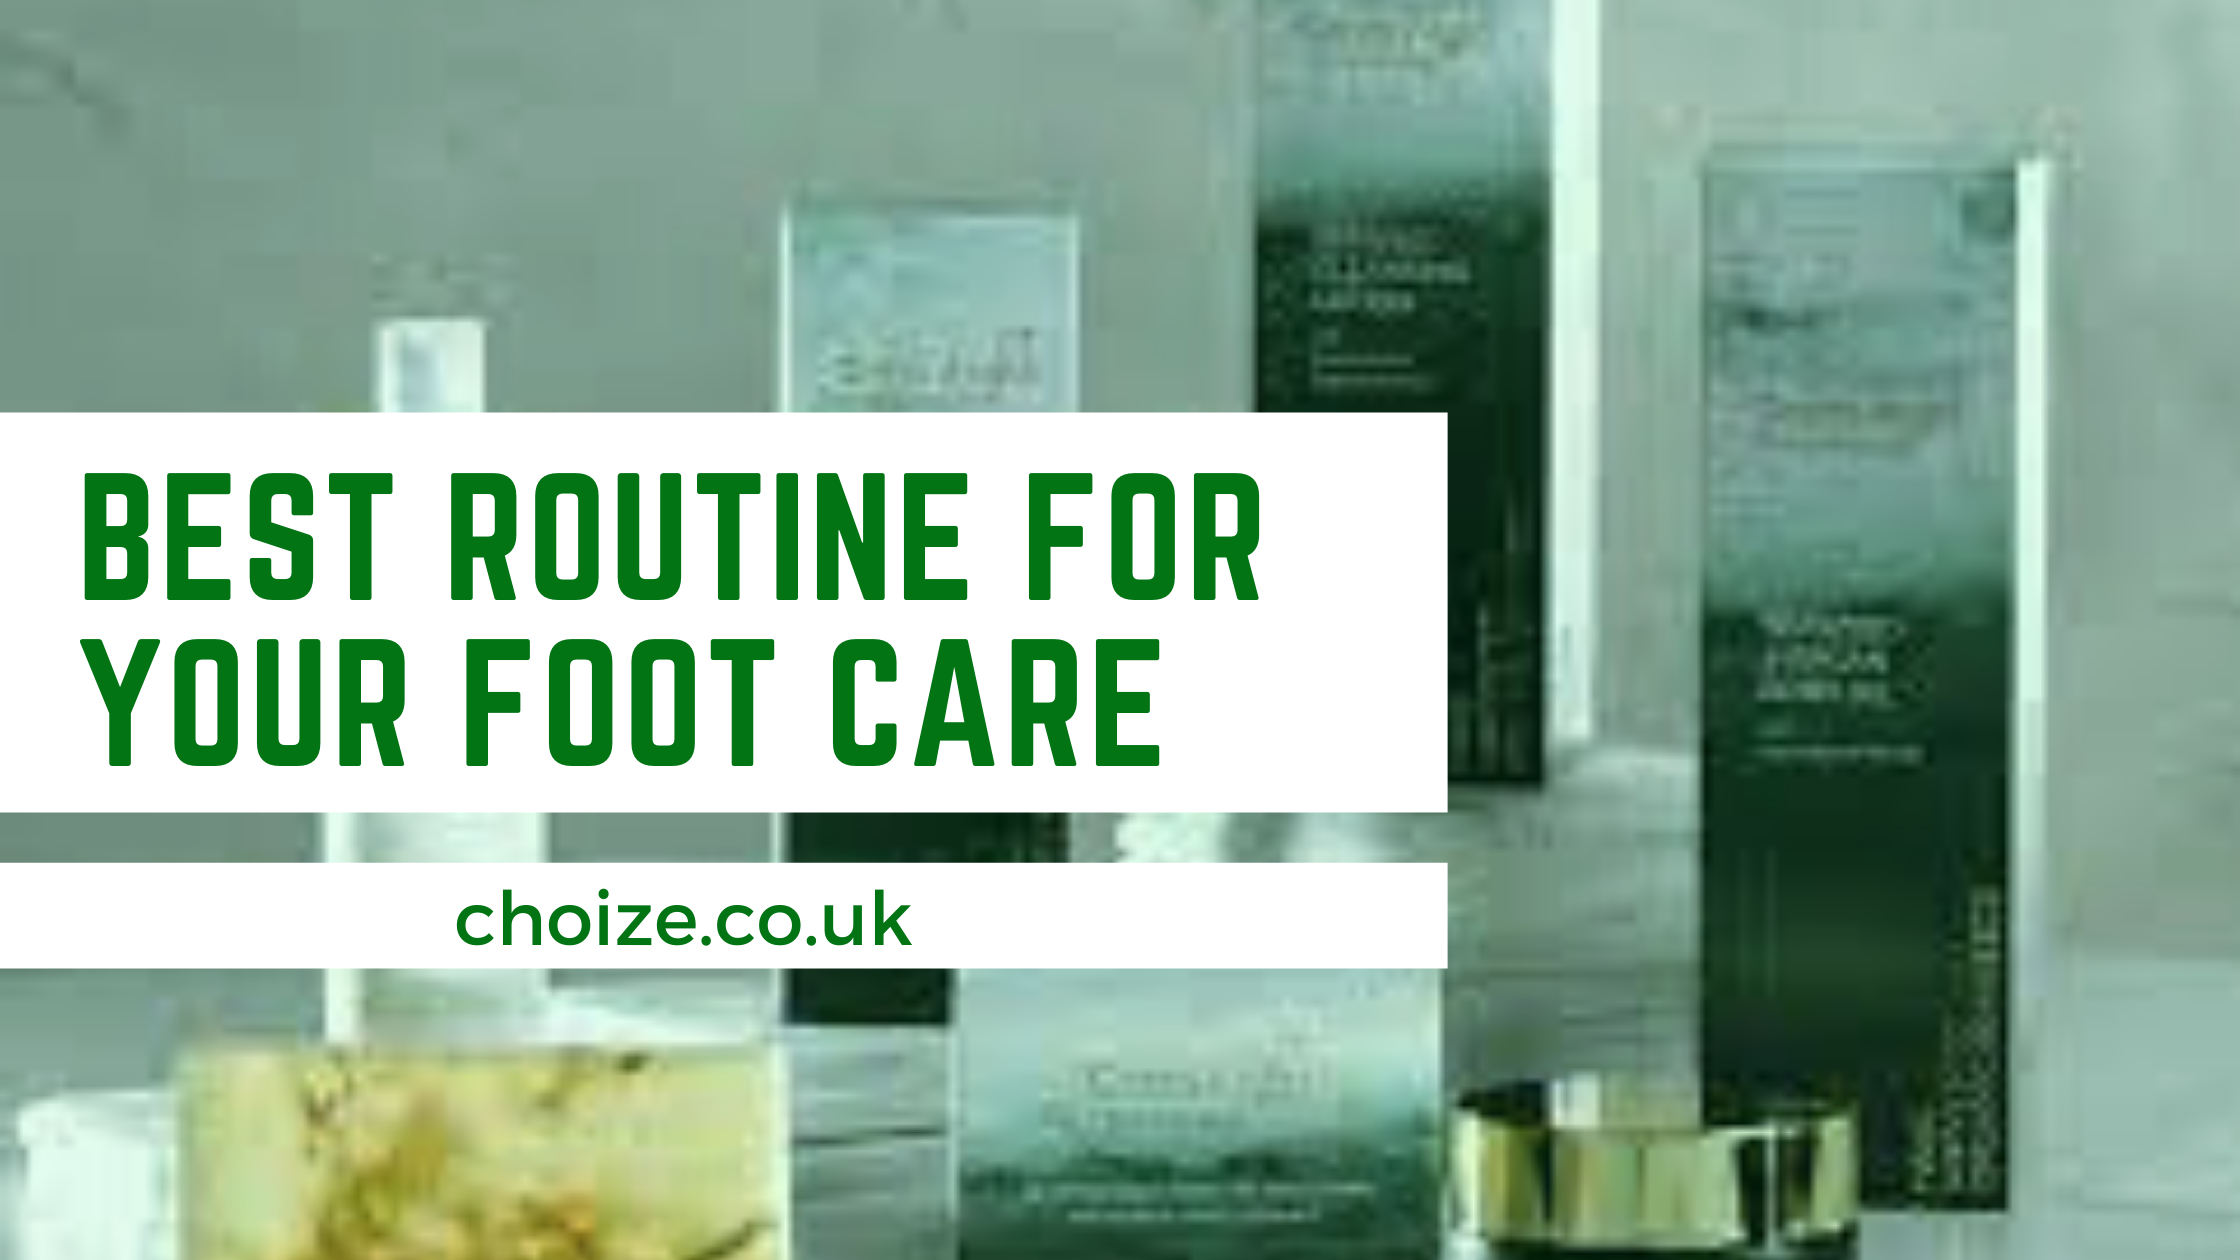 Why is foot care important? The best routine to follow